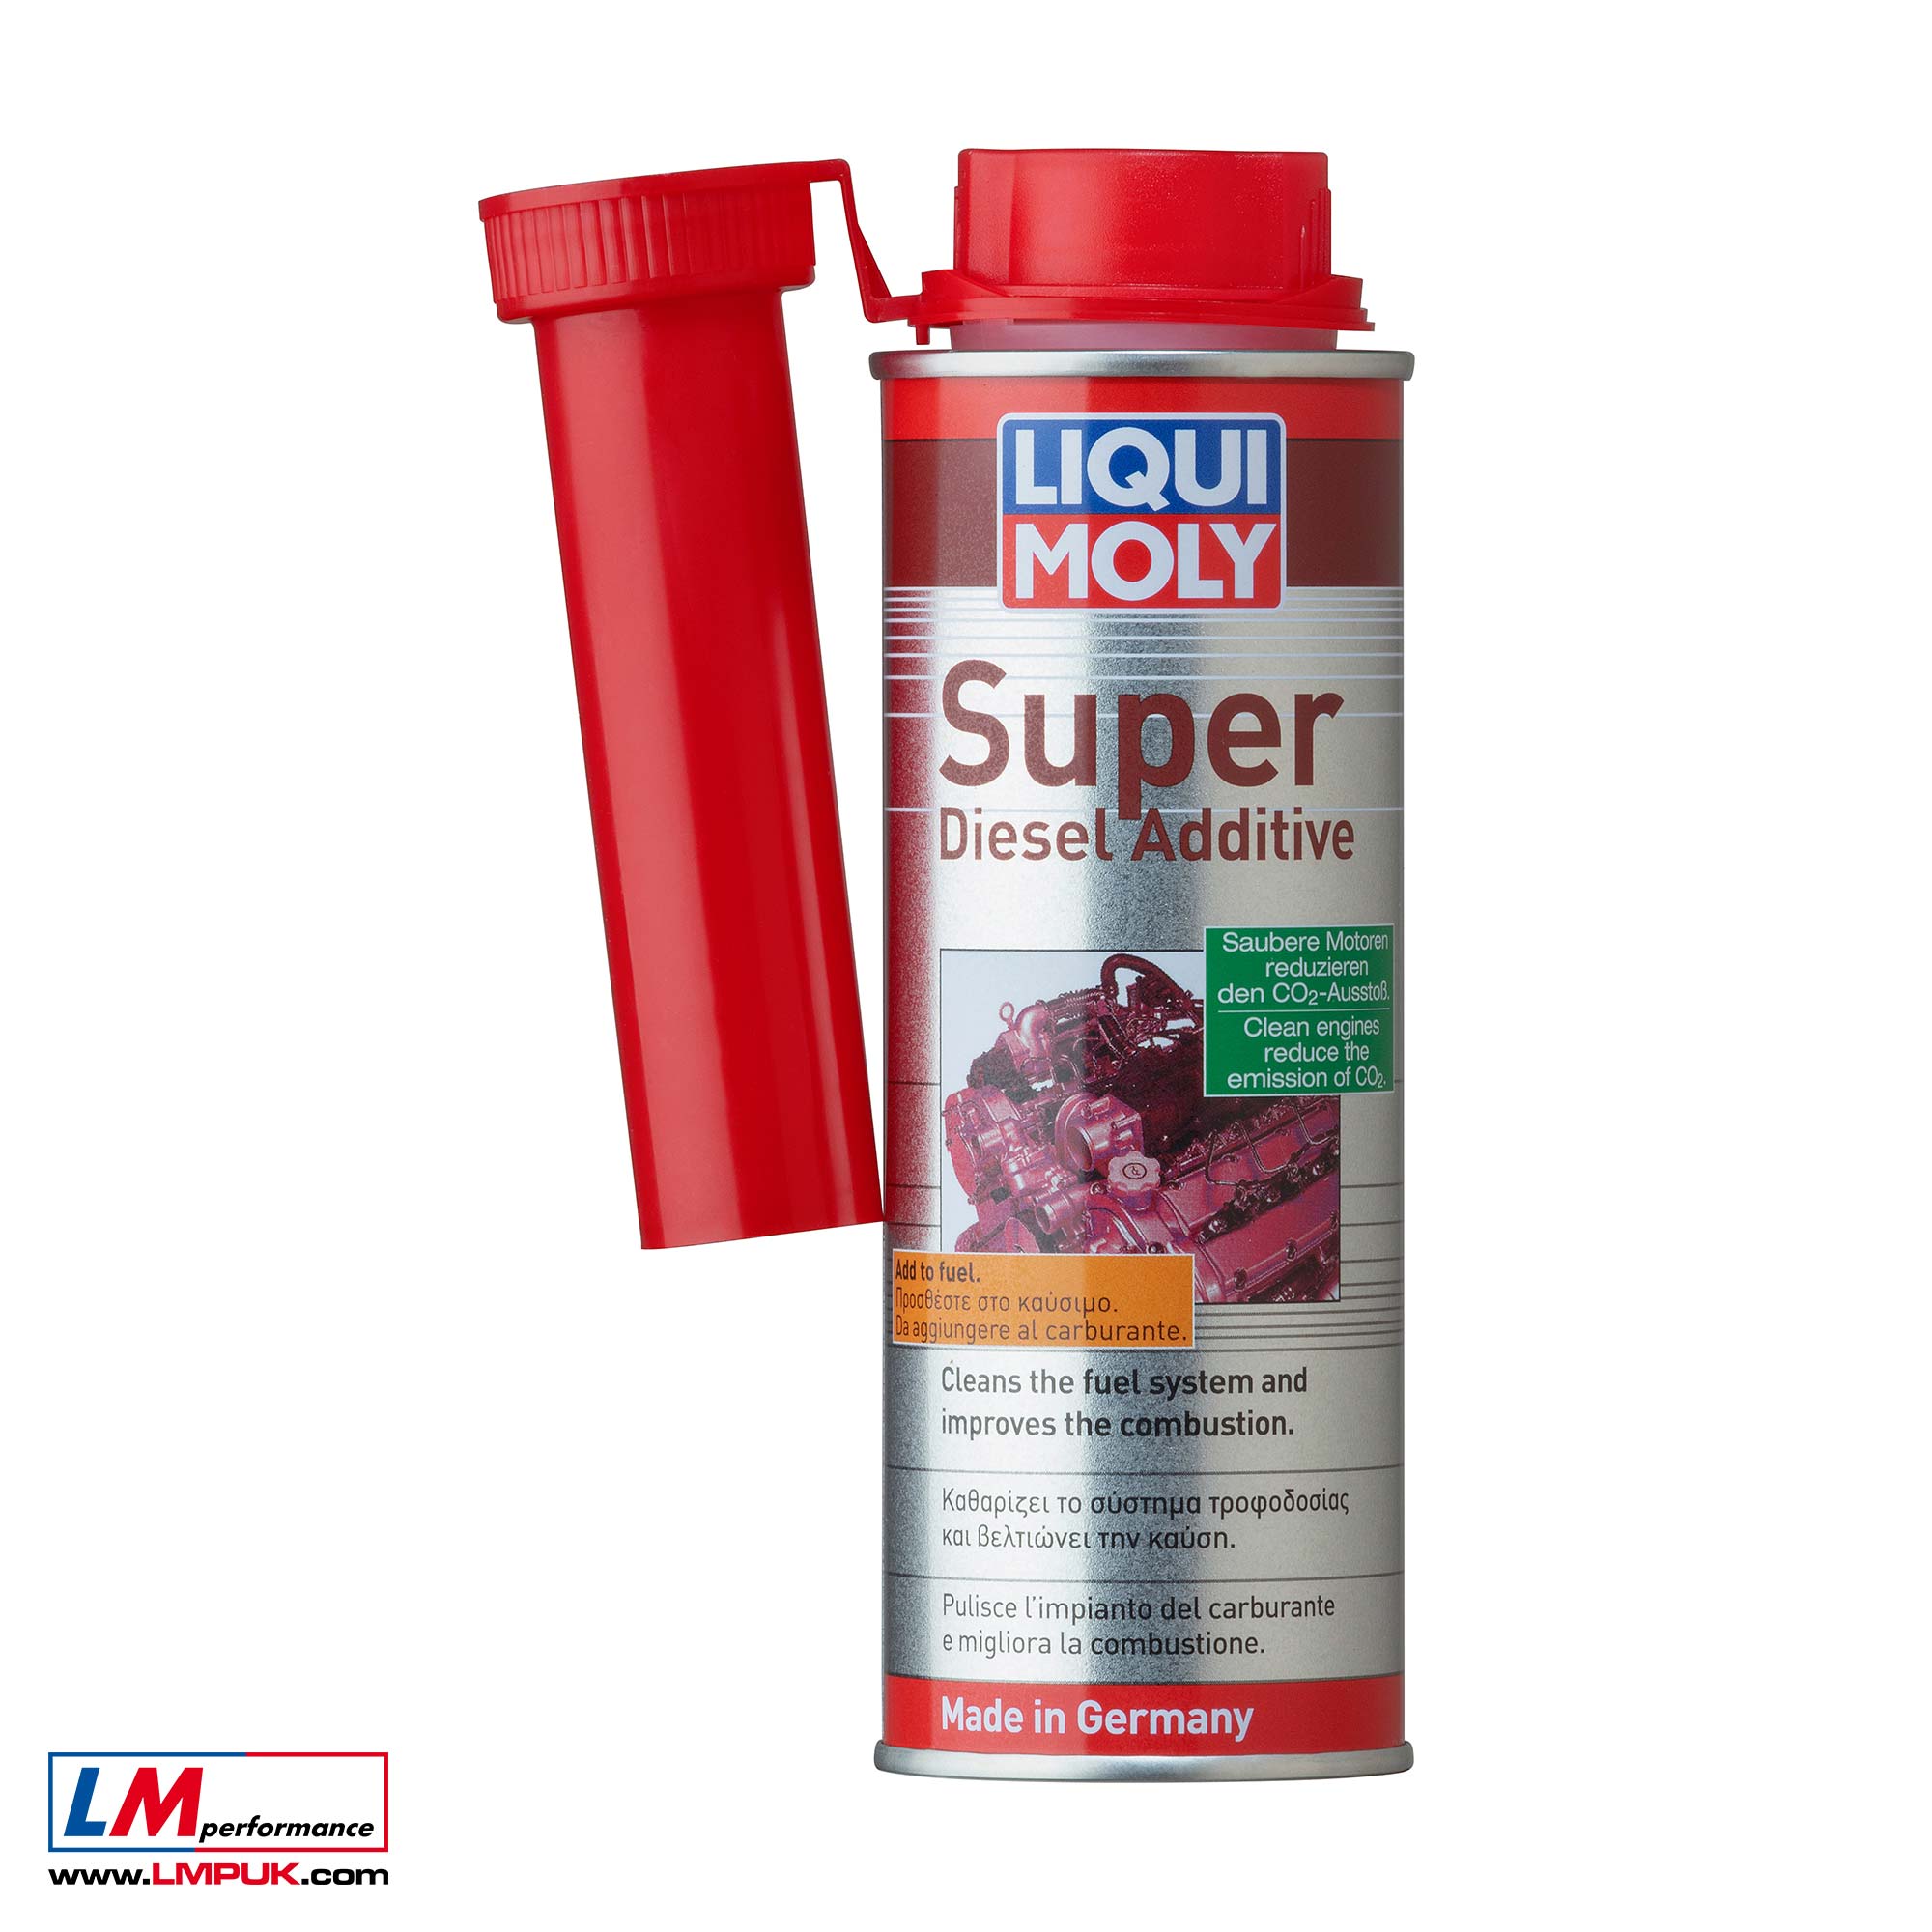 Super Diesel Additive by LIQUI MOLY – LM Performance